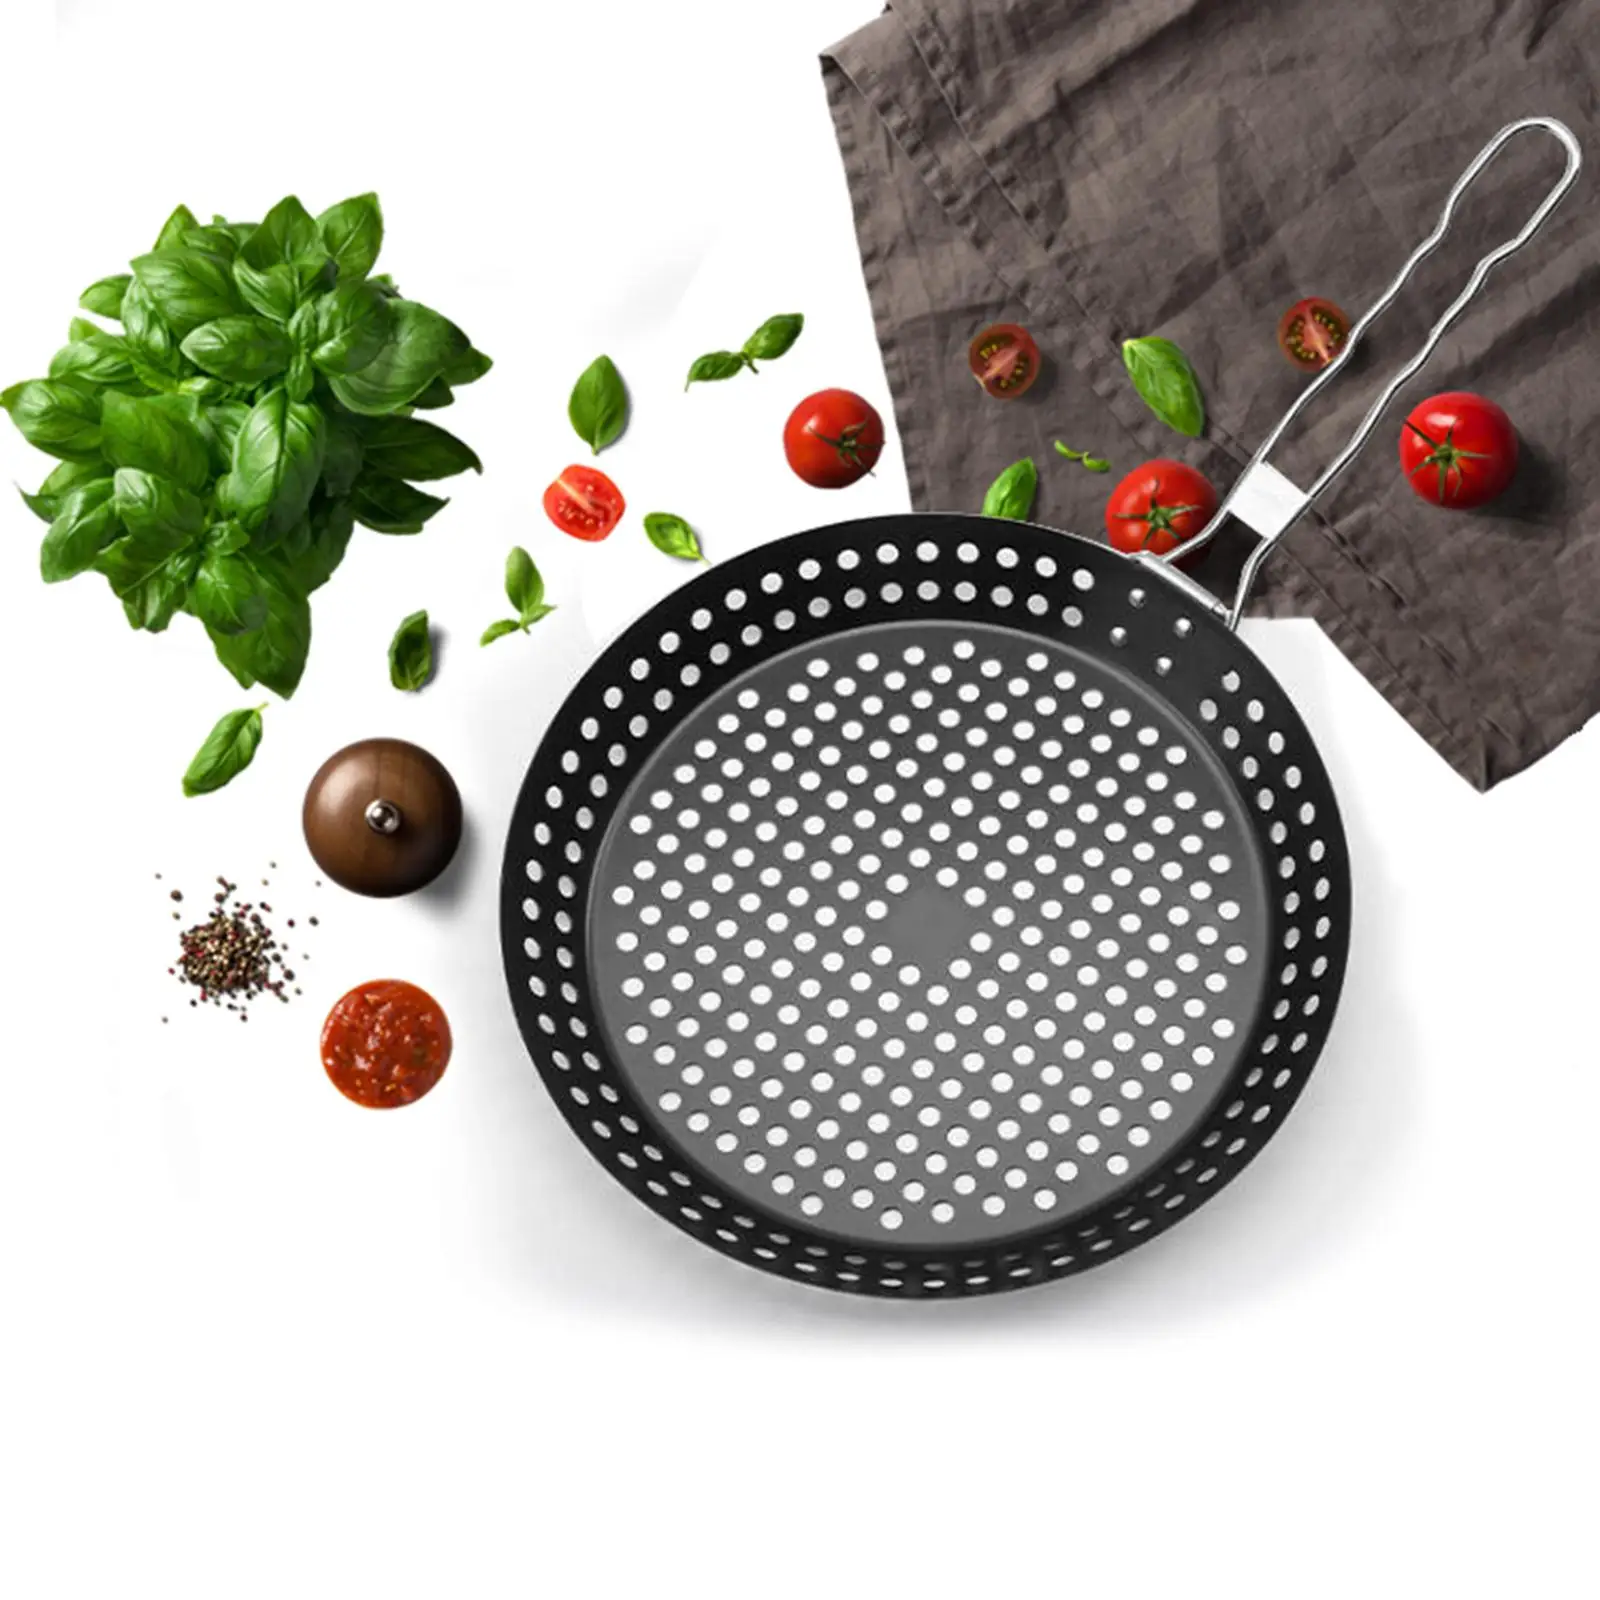 Indoor Outdoor BBQ Grill Plate Smokeless Grilling Plate Non Stick Frying Pan for Veggies Meat Steak Pizza Cooking Tool